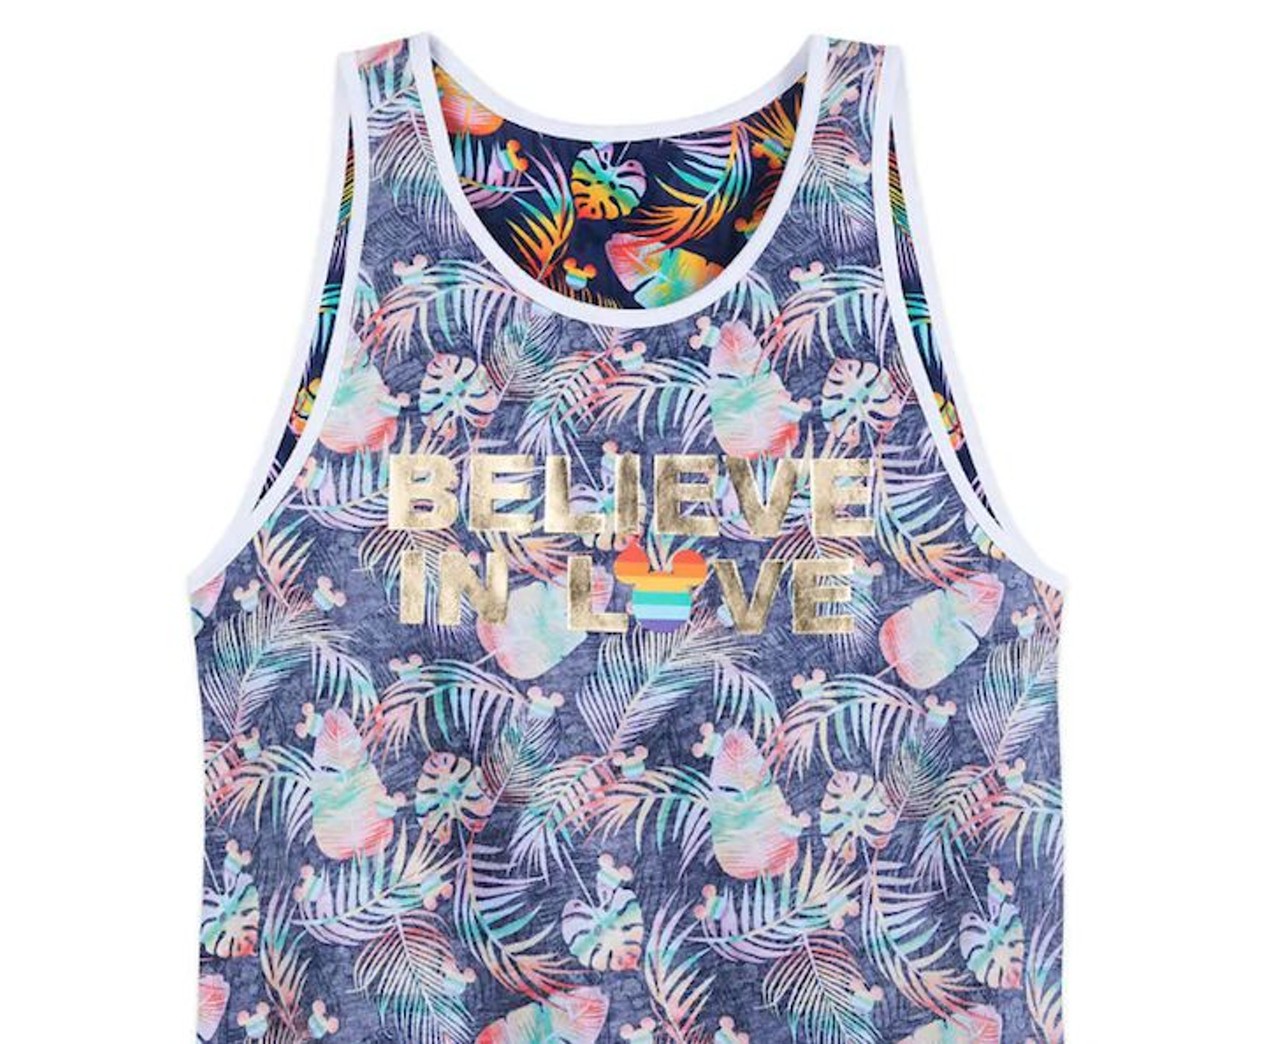 Mickey Mouse Tank Top
A colorful tropical design decorates this cotton tank top with white trim, featuring a screen art rainbow Mickey Mouse icon and gold foil lettering saying &#147;Believe in Love&#148; for $26.95  
Photo via shopDisney